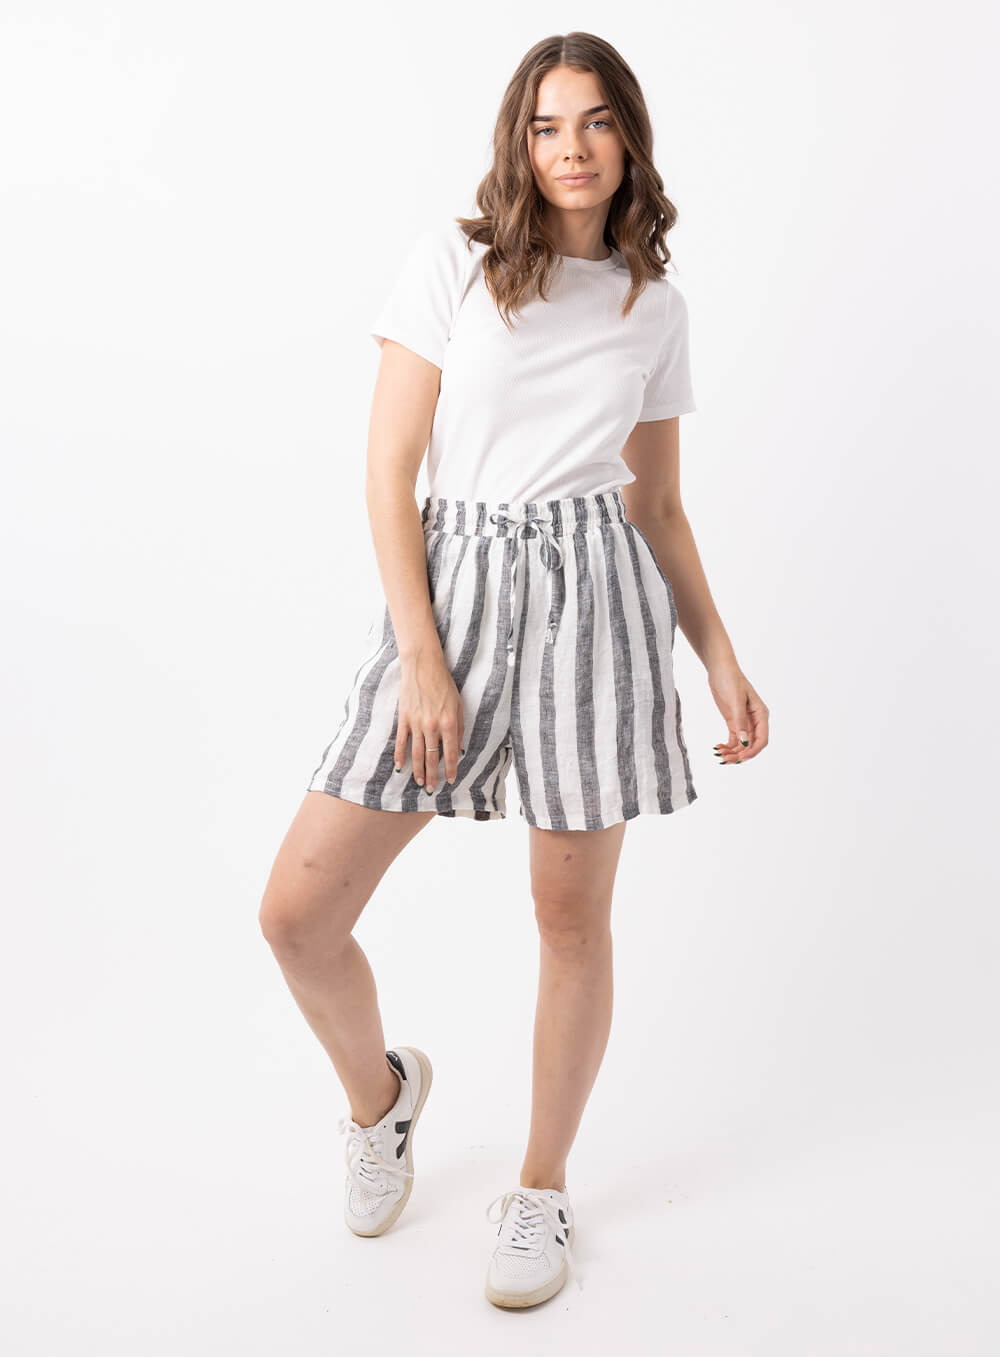 The Charlie stripe linen short in black and white is made from 100% breathable linen, featuring wide elastic waistband with tie, finishes mid thigh with finished hem